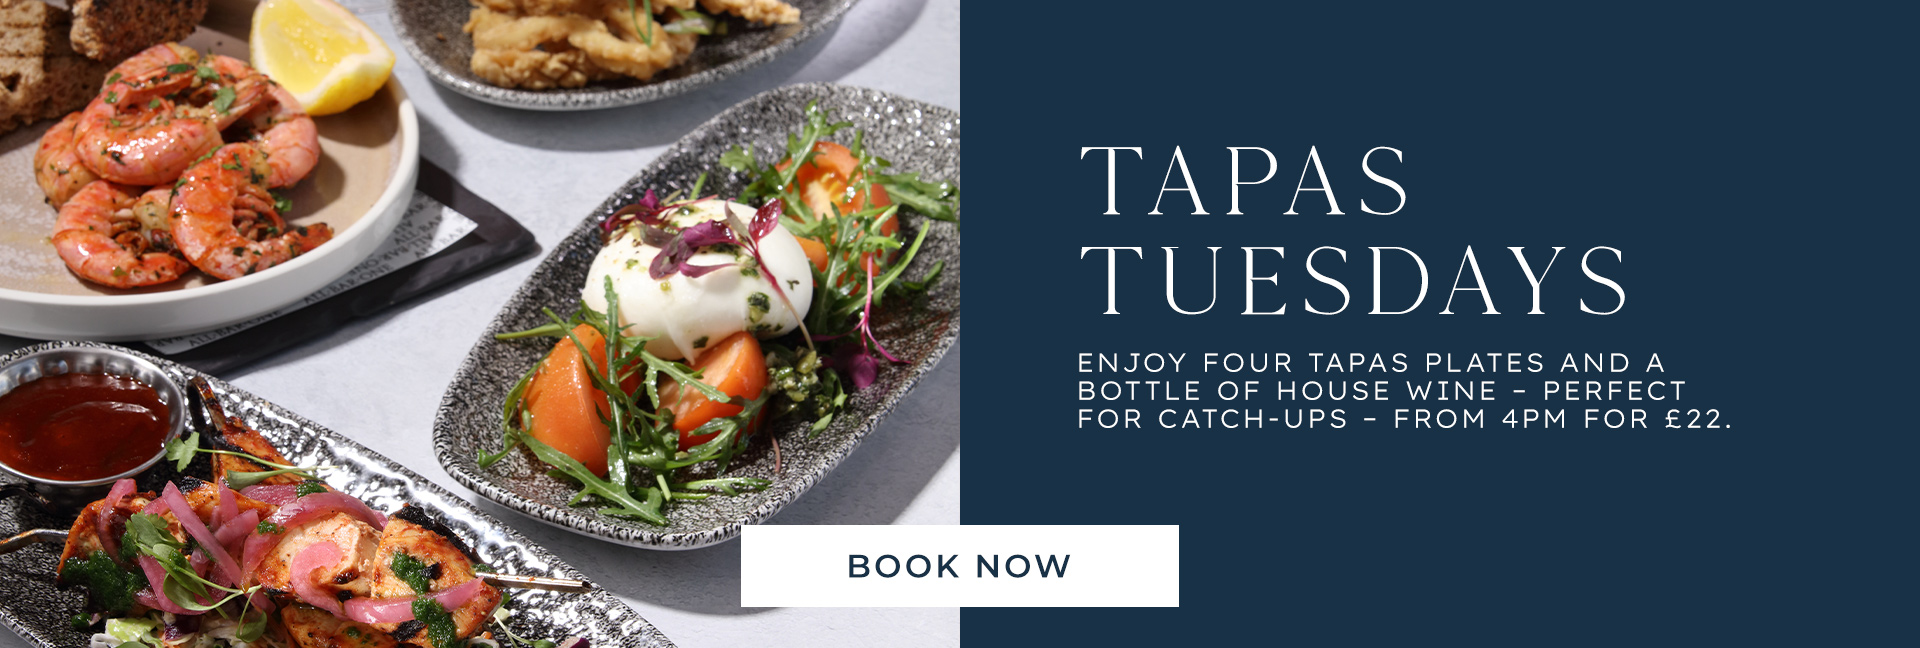 Tapas Tuesday at All Bar One Liverpool Street - Book now